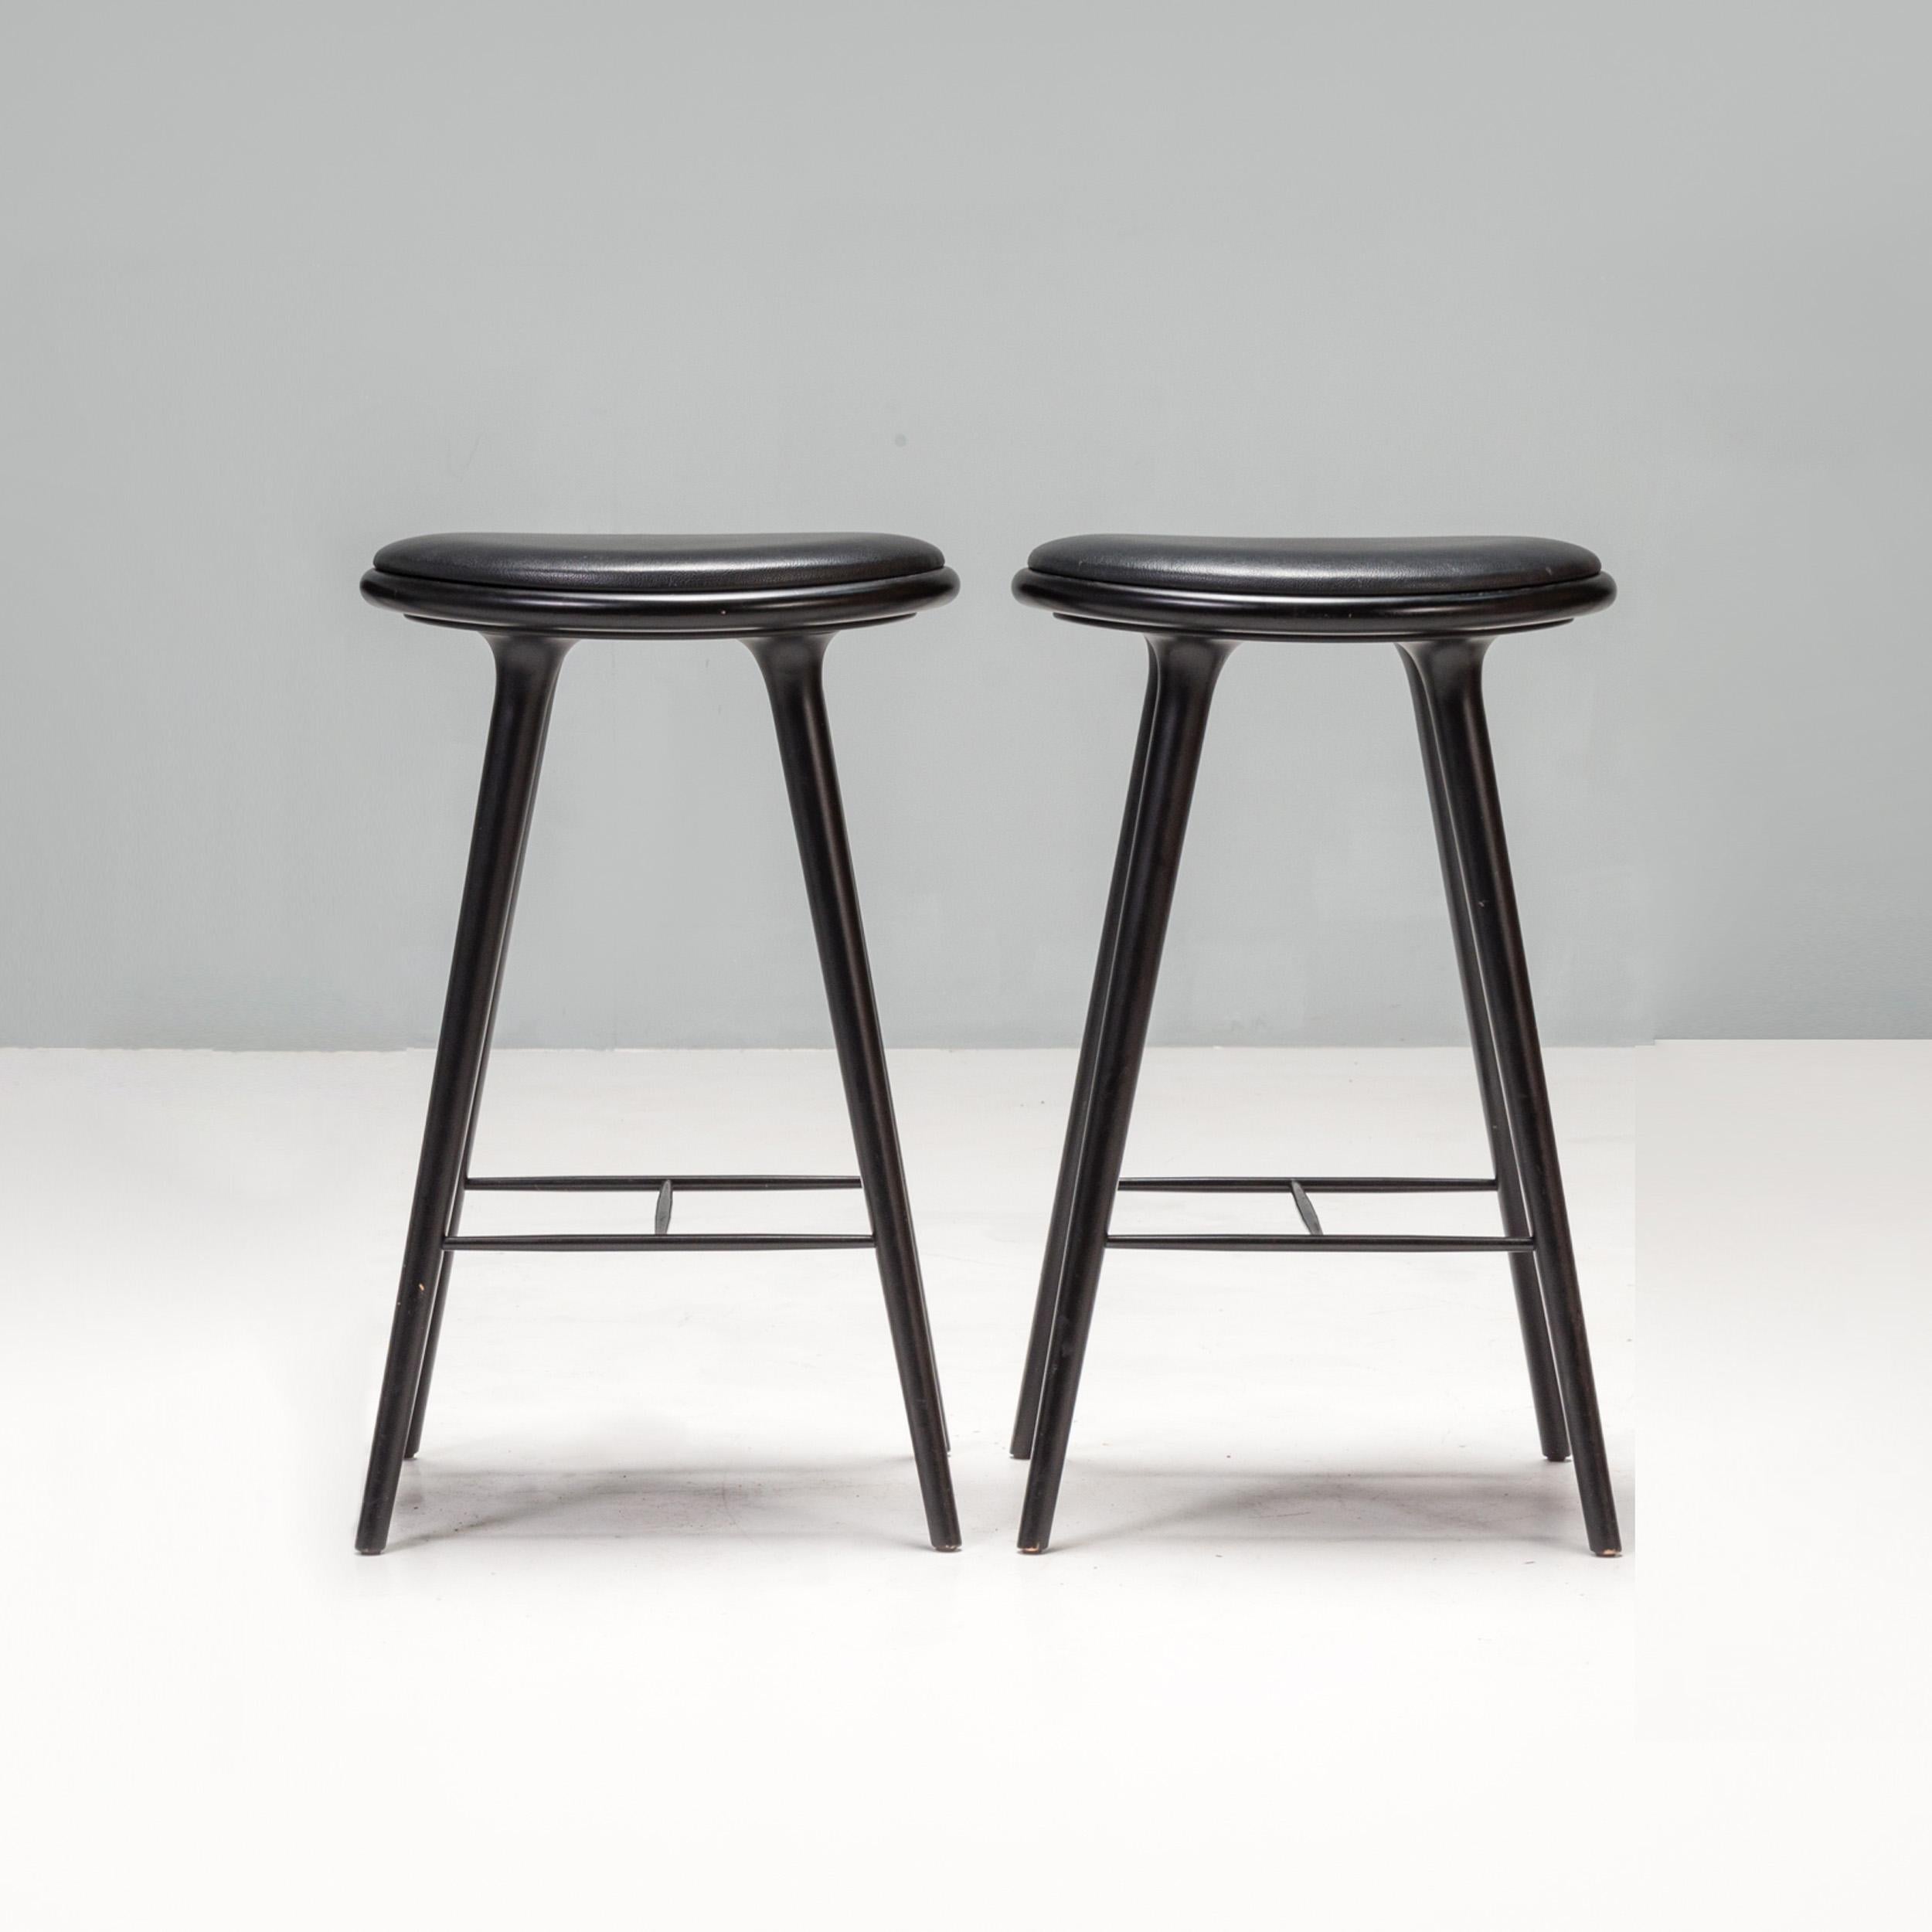 The high stool was designed by Space Copenhagen and manufactured.

The beechwood features a black lacquer stain and has an organic but Minimalist Silhouette with softly curved corners and sleek straight lines.

The stools are finished with black